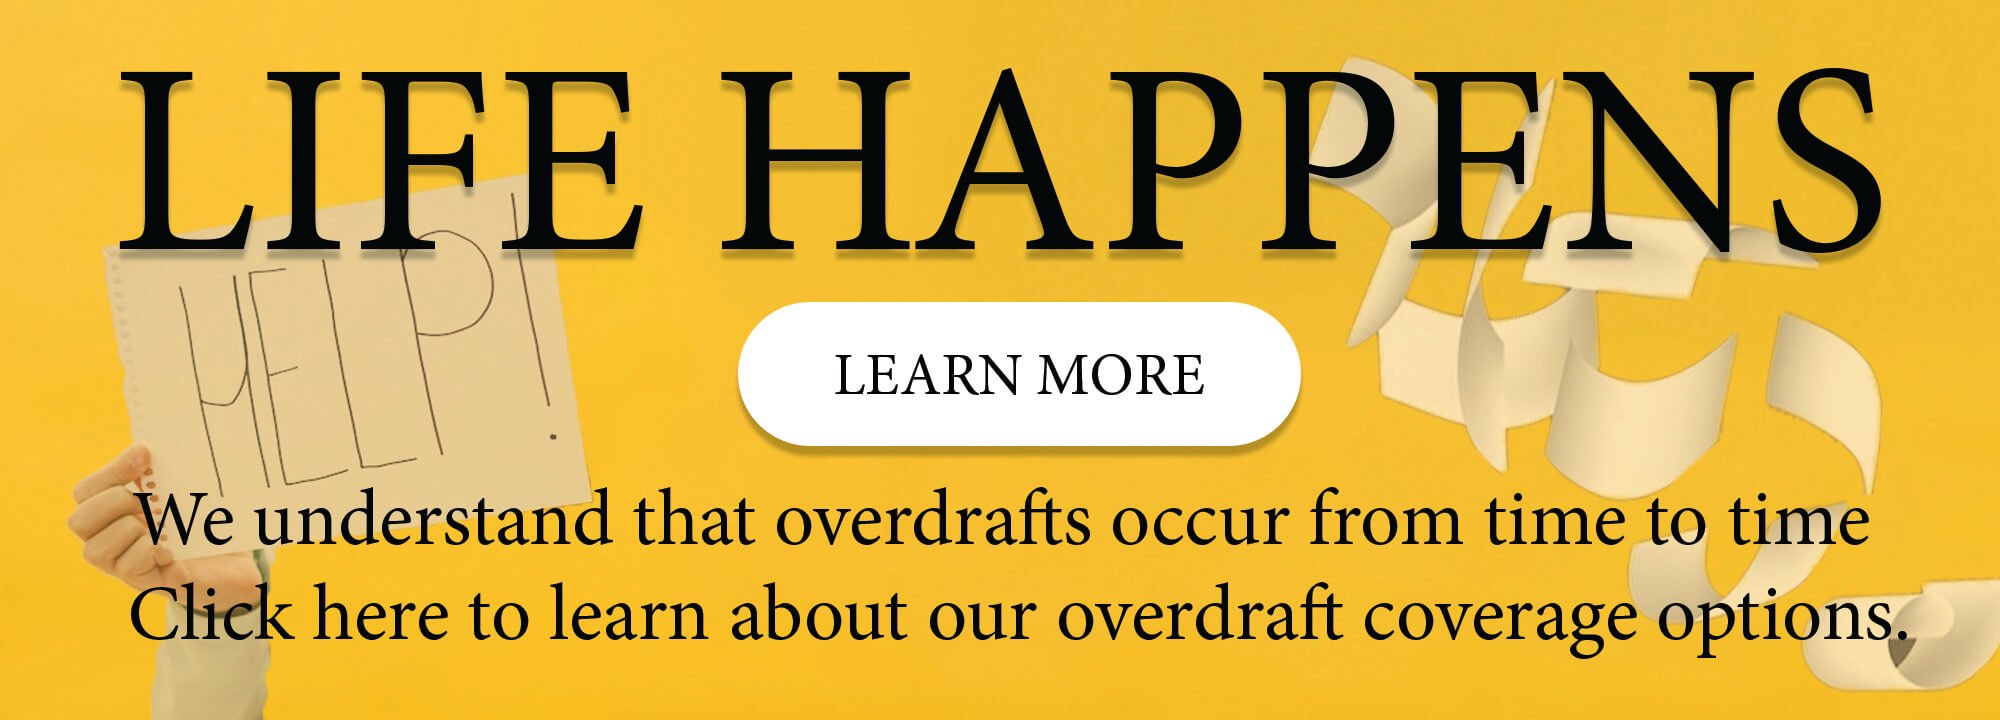 Life Happens. Learn More. We understand that overdrafts occur from time to time. Click here to learn about our overdraft coverage options.